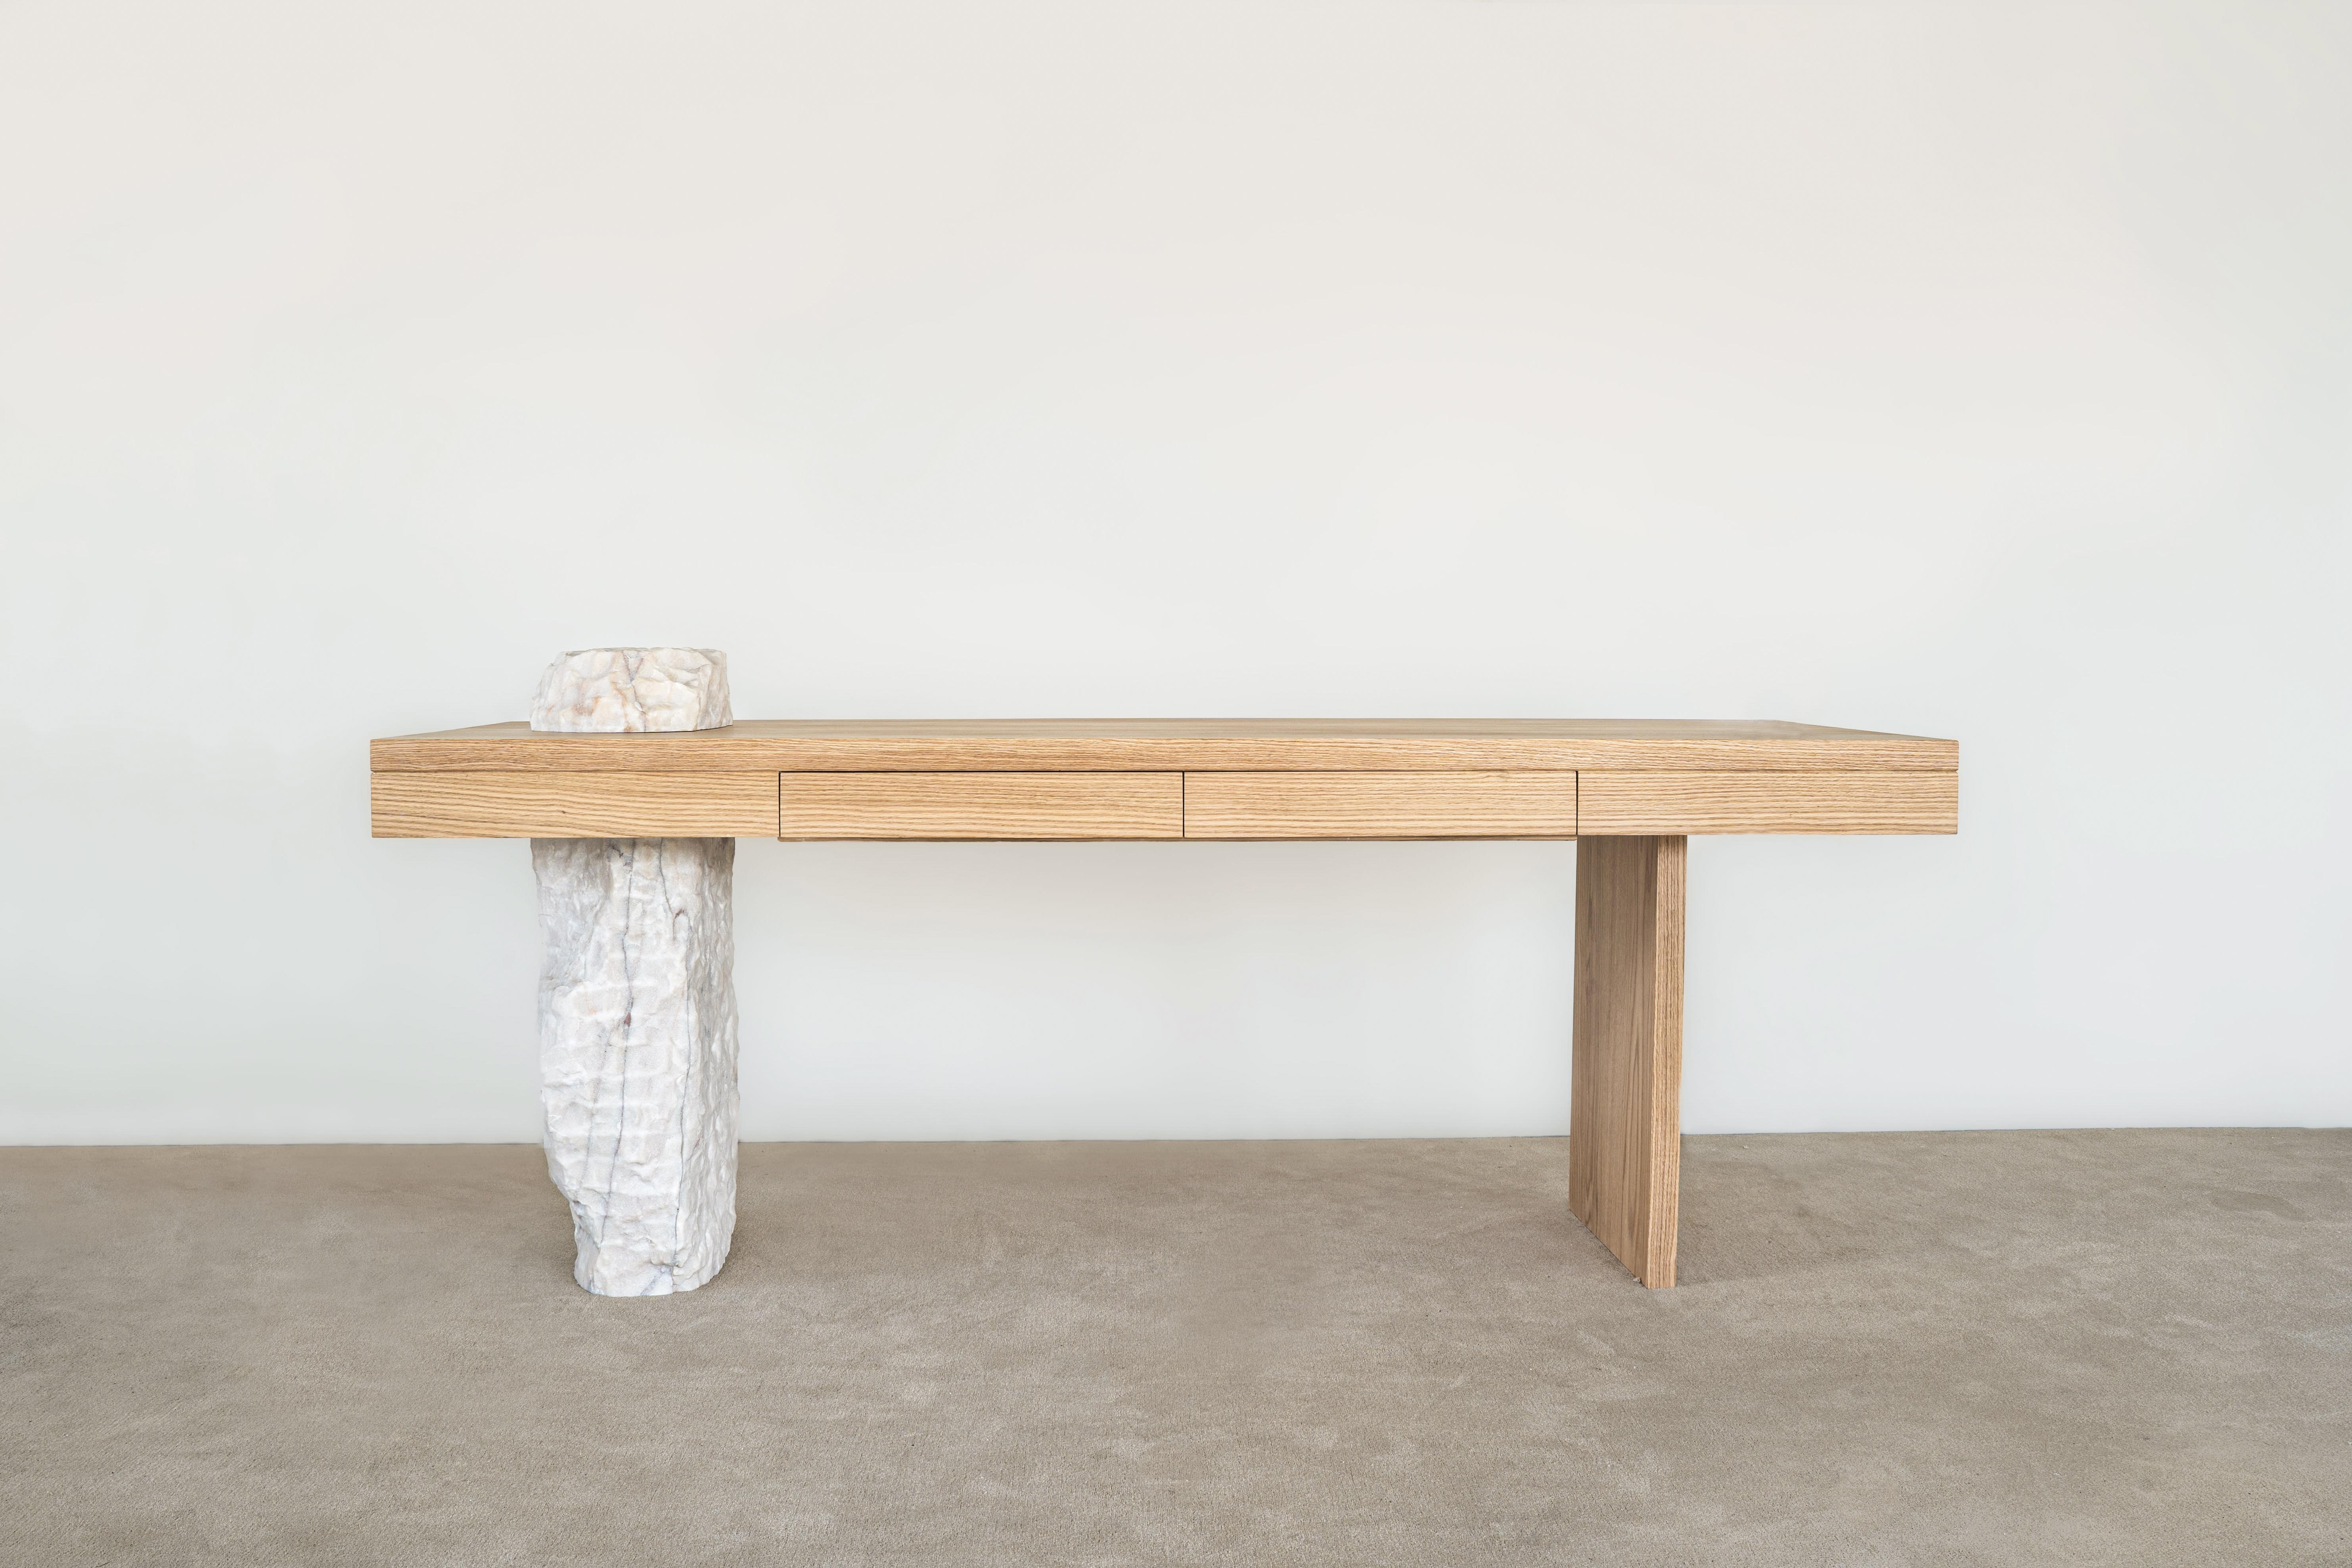 Atus Desk by Bea Interiors
One of a Kind.
Dimensions: D 91 x W 204 x H 79 cm.
Materials: Solid white oak and marble.

Atus desk is a stunning addition to any home office. By incorporating elements of nature into its design, this desk beautifully